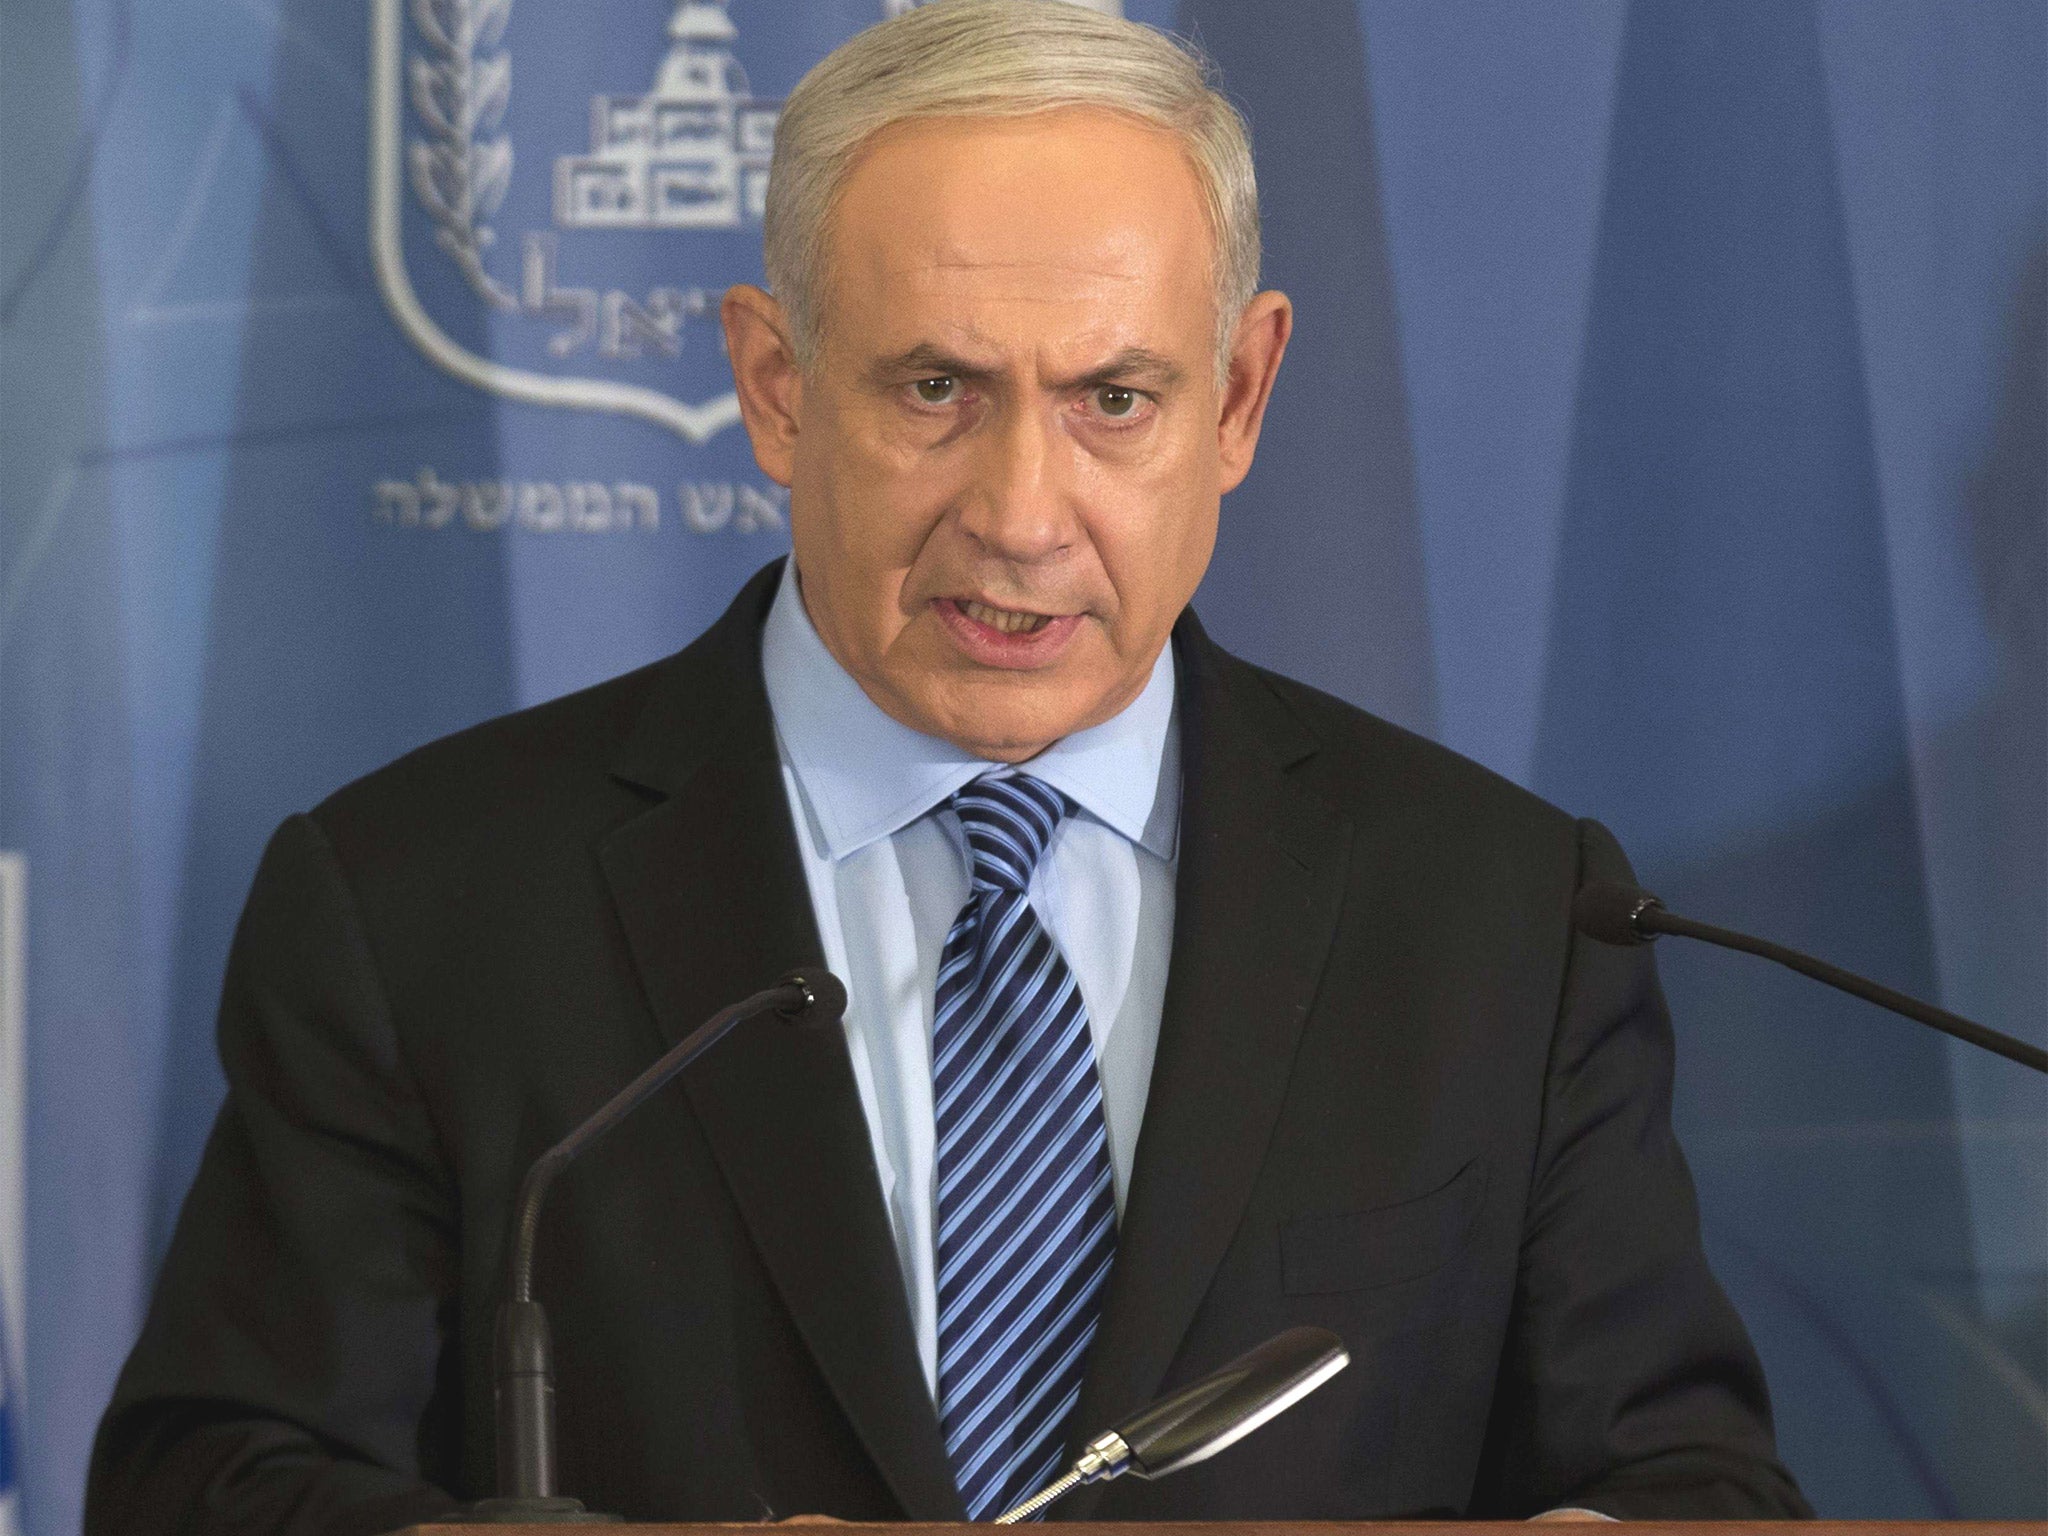 Netanyahu is prepared to risk international censure that such attacks have provoked in the past